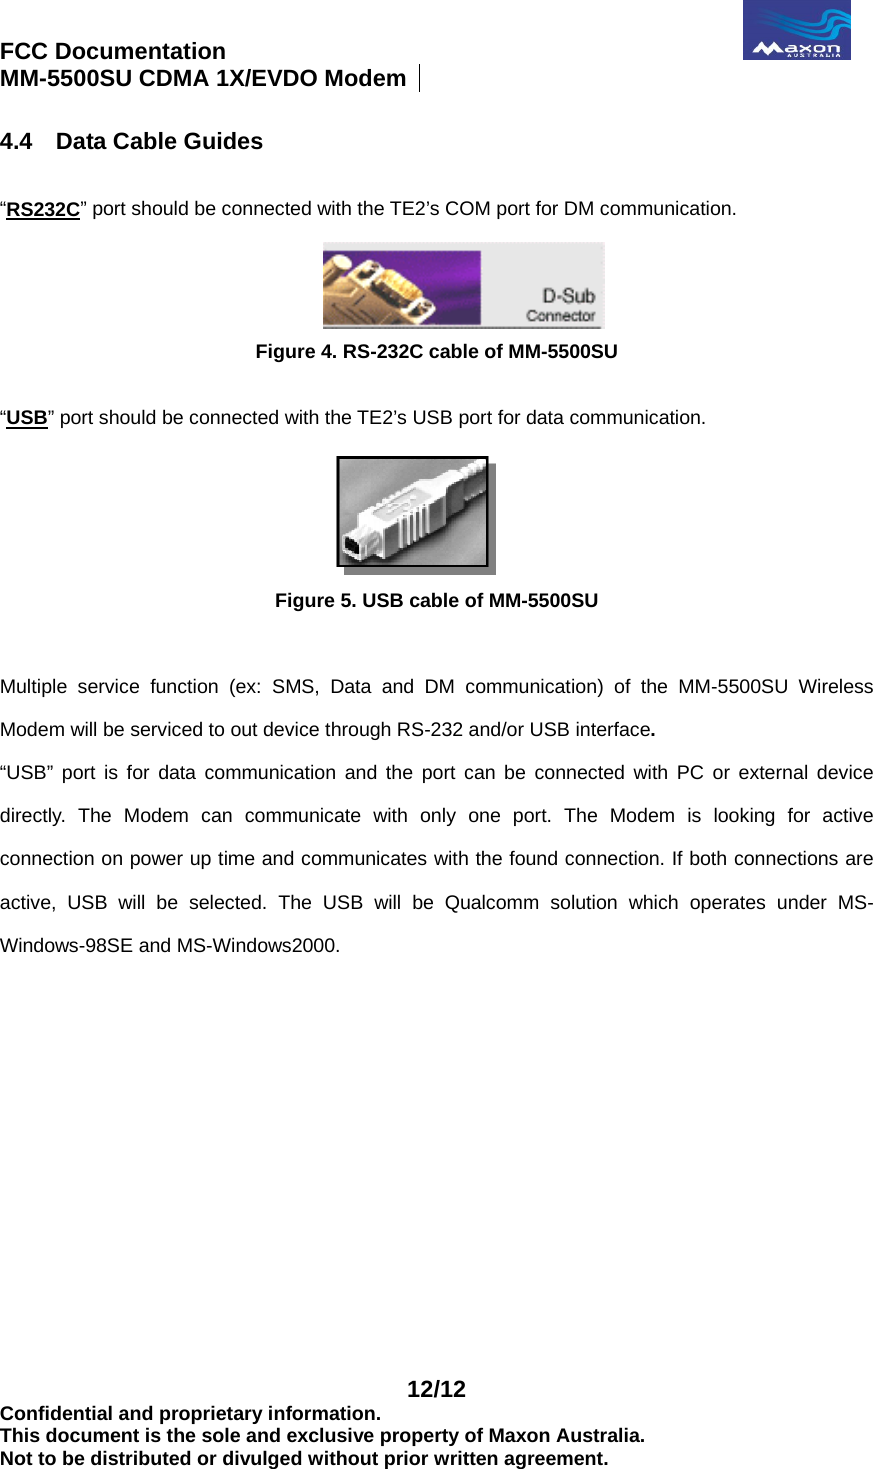 FCC Documentation                                              MM-5500SU CDMA 1X/EVDO Modem    12/12 Confidential and proprietary information. This document is the sole and exclusive property of Maxon Australia. Not to be distributed or divulged without prior written agreement. 4.4  Data Cable Guides  “RS232C” port should be connected with the TE2’s COM port for DM communication.  Figure 4. RS-232C cable of MM-5500SU  “USB” port should be connected with the TE2’s USB port for data communication.  Figure 5. USB cable of MM-5500SU  Multiple service function (ex: SMS, Data and DM communication) of the MM-5500SU Wireless Modem will be serviced to out device through RS-232 and/or USB interface. “USB” port is for data communication and the port can be connected with PC or external device directly. The Modem can communicate with only one port. The Modem is looking for active connection on power up time and communicates with the found connection. If both connections are active, USB will be selected. The USB will be Qualcomm solution which operates under MS-Windows-98SE and MS-Windows2000.   